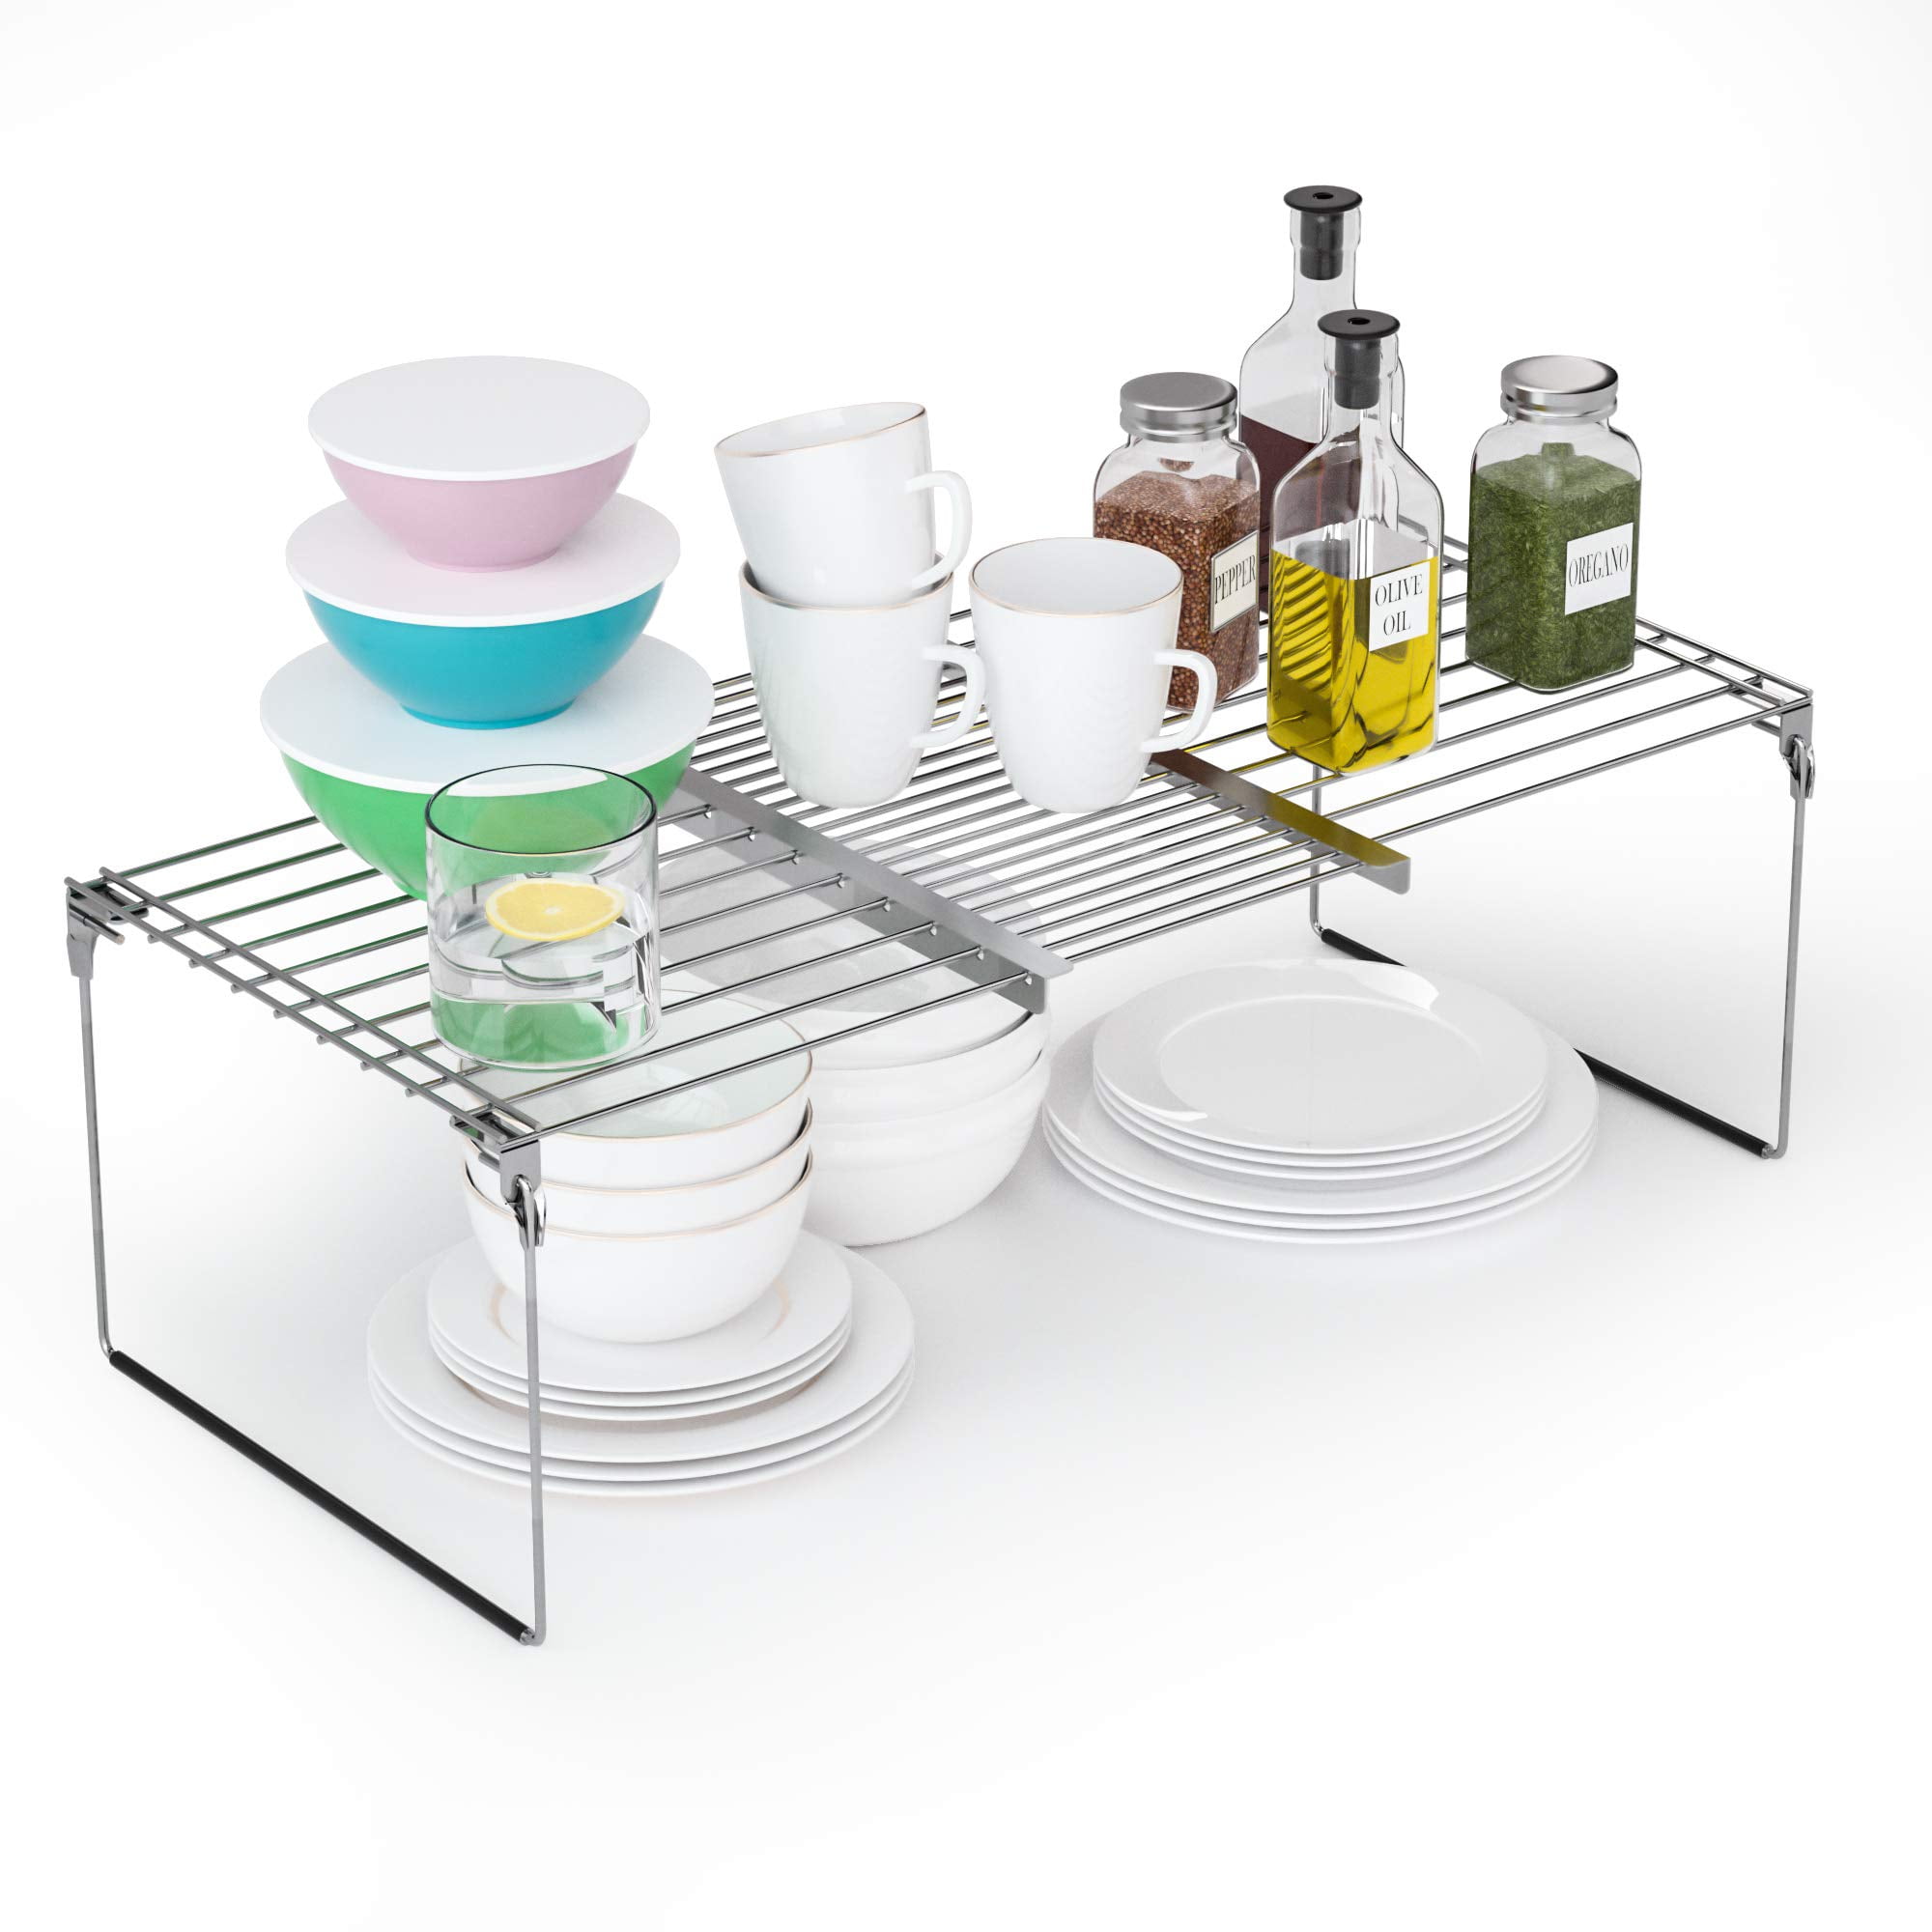 Details about   Home Cabinet and Pantry Organizer Kitchen Rack Holder Houseware Storage New 